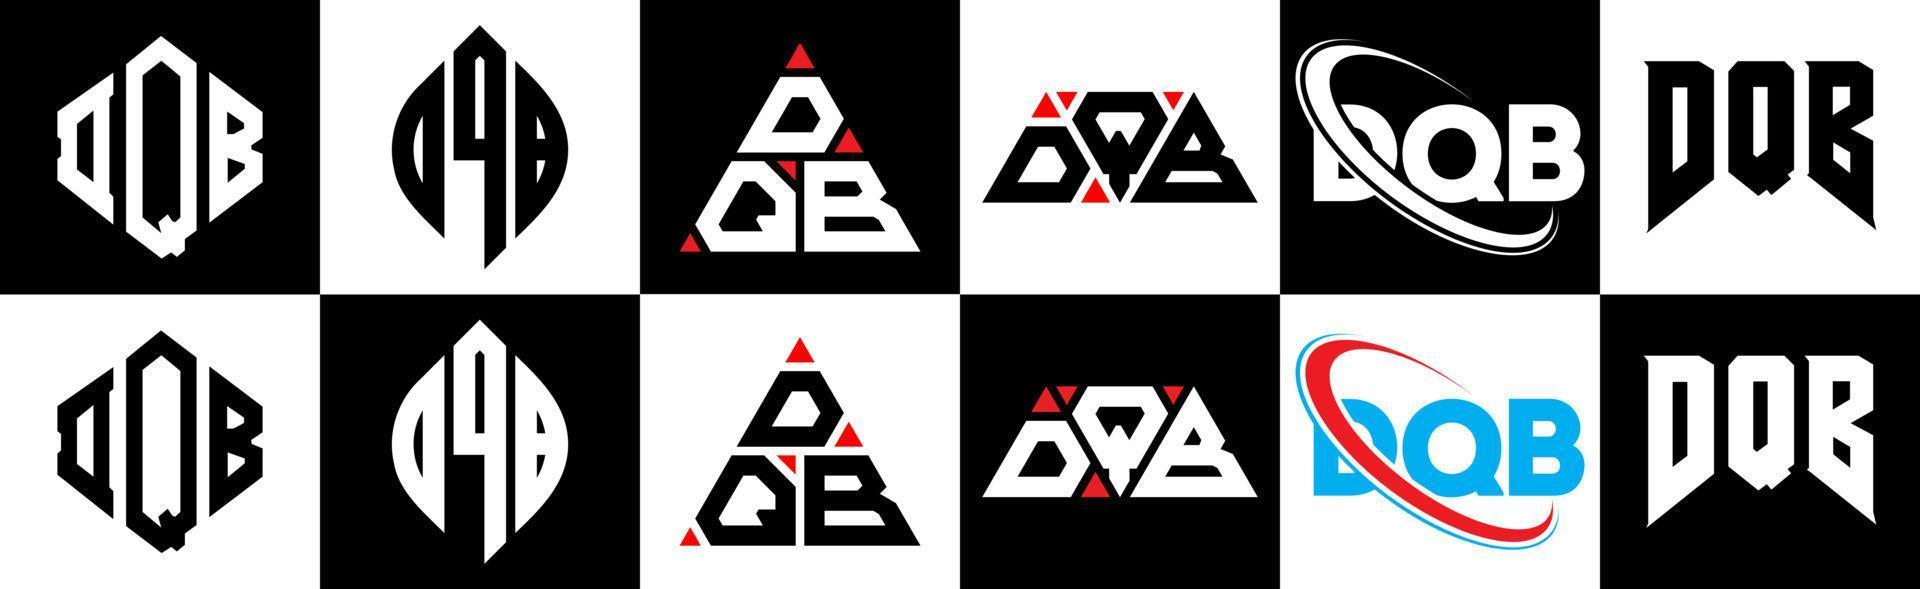 DQB letter logo design in six style. DQB polygon, circle, triangle, hexagon, flat and simple style with black and white color variation letter logo set in one artboard. DQB minimalist and classic logo vector